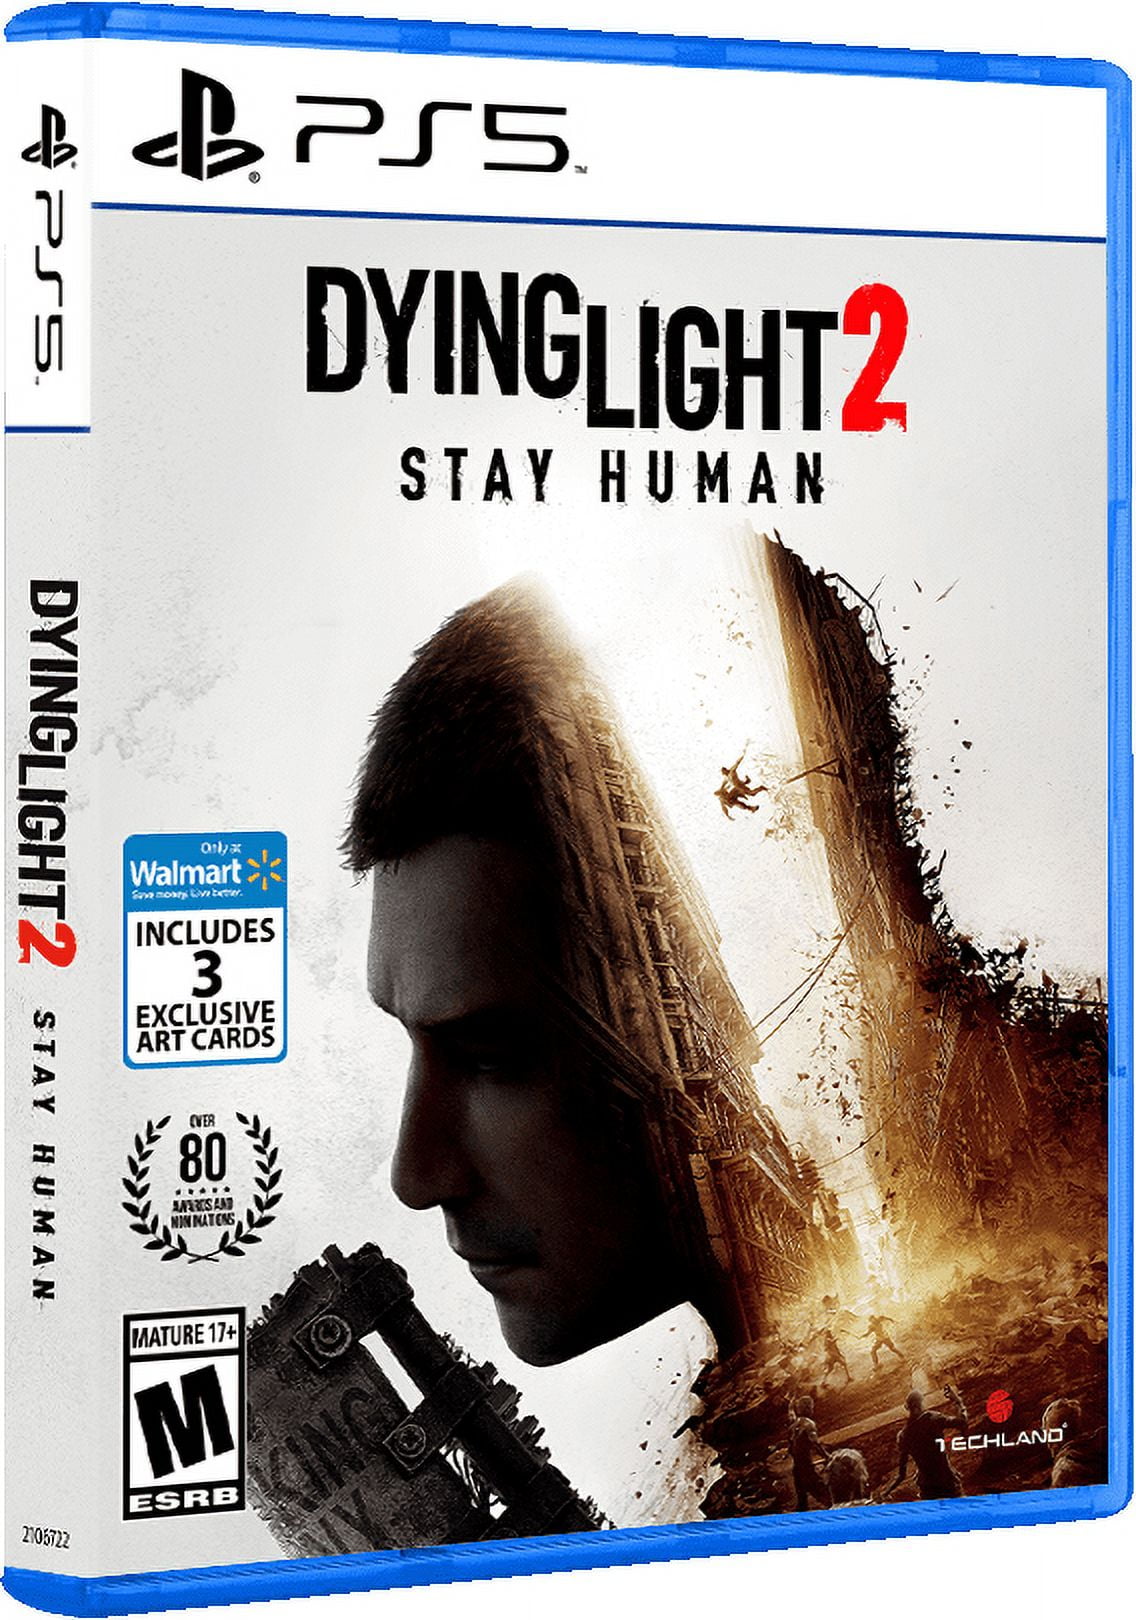 Dying Light 2 - PlayStation 4 : : Games e Consoles